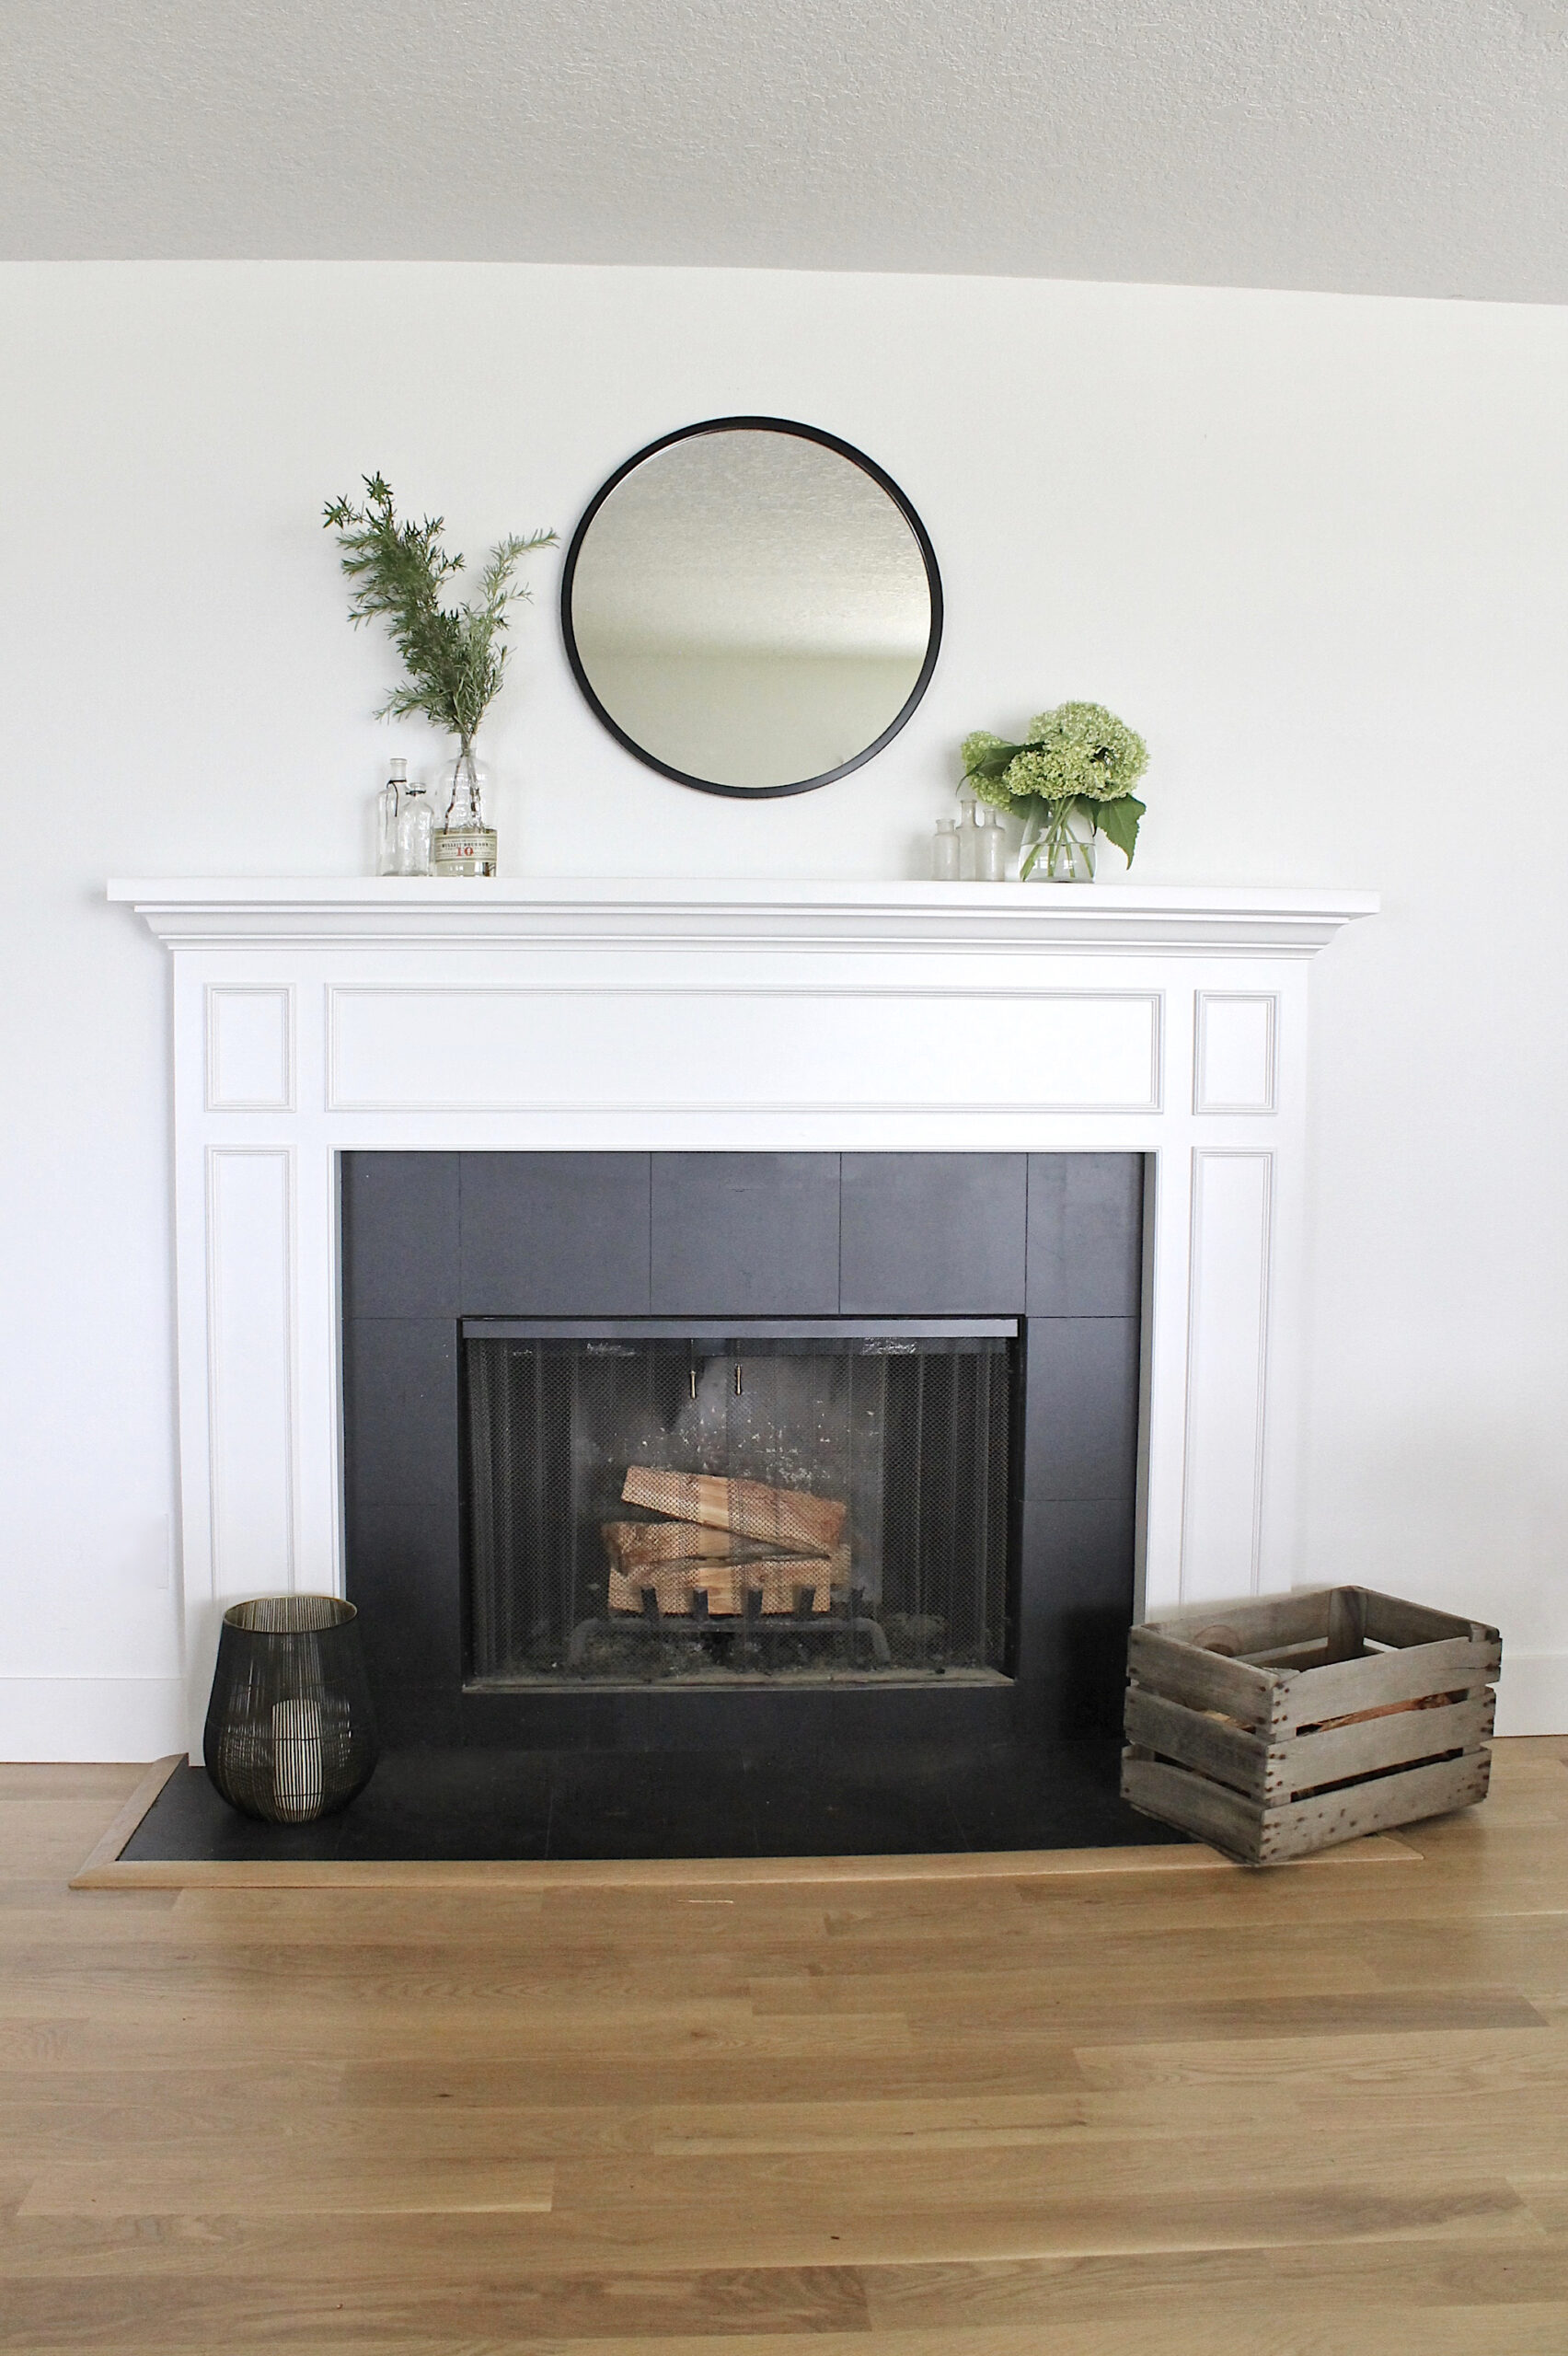 How To Paint A Ceramic Tile Fireplace, How To Change Tile Fireplace Surround